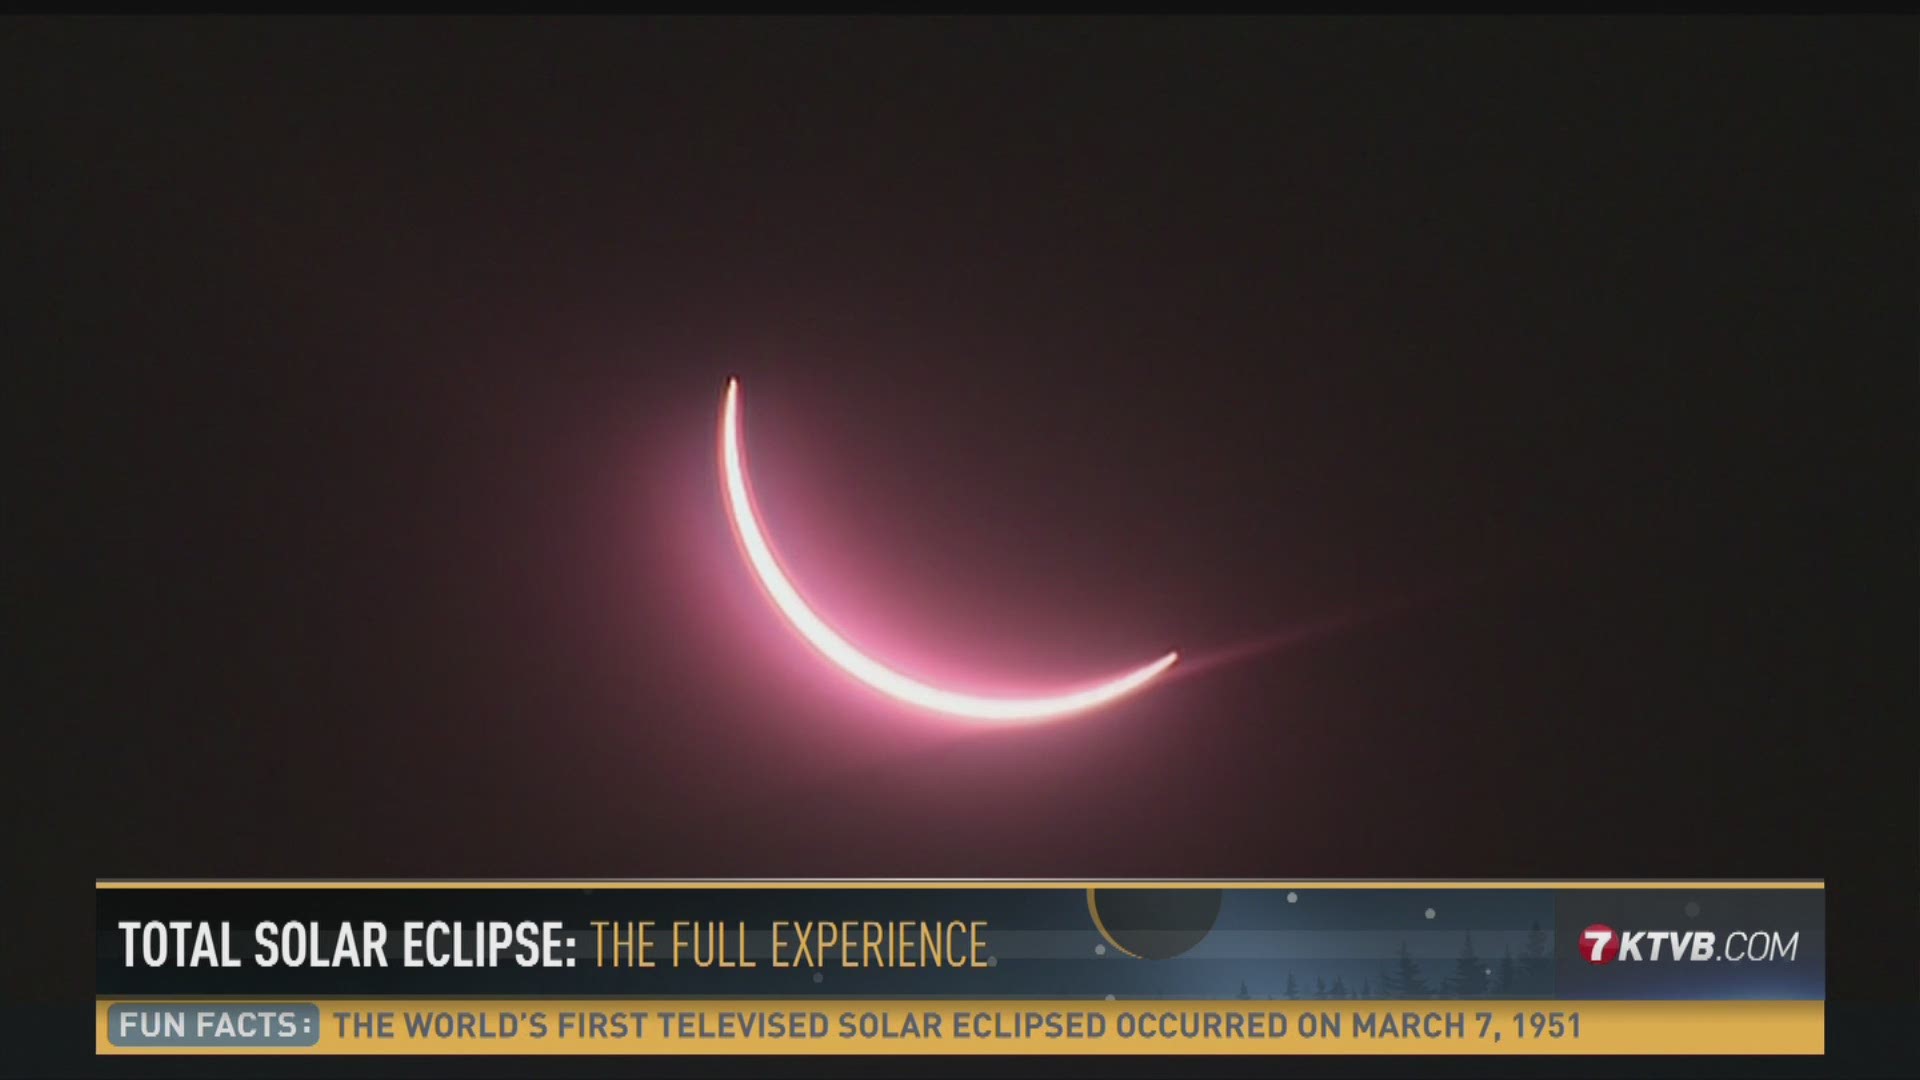 KTVB was broadcasting live when the eclipse passed over Weiser